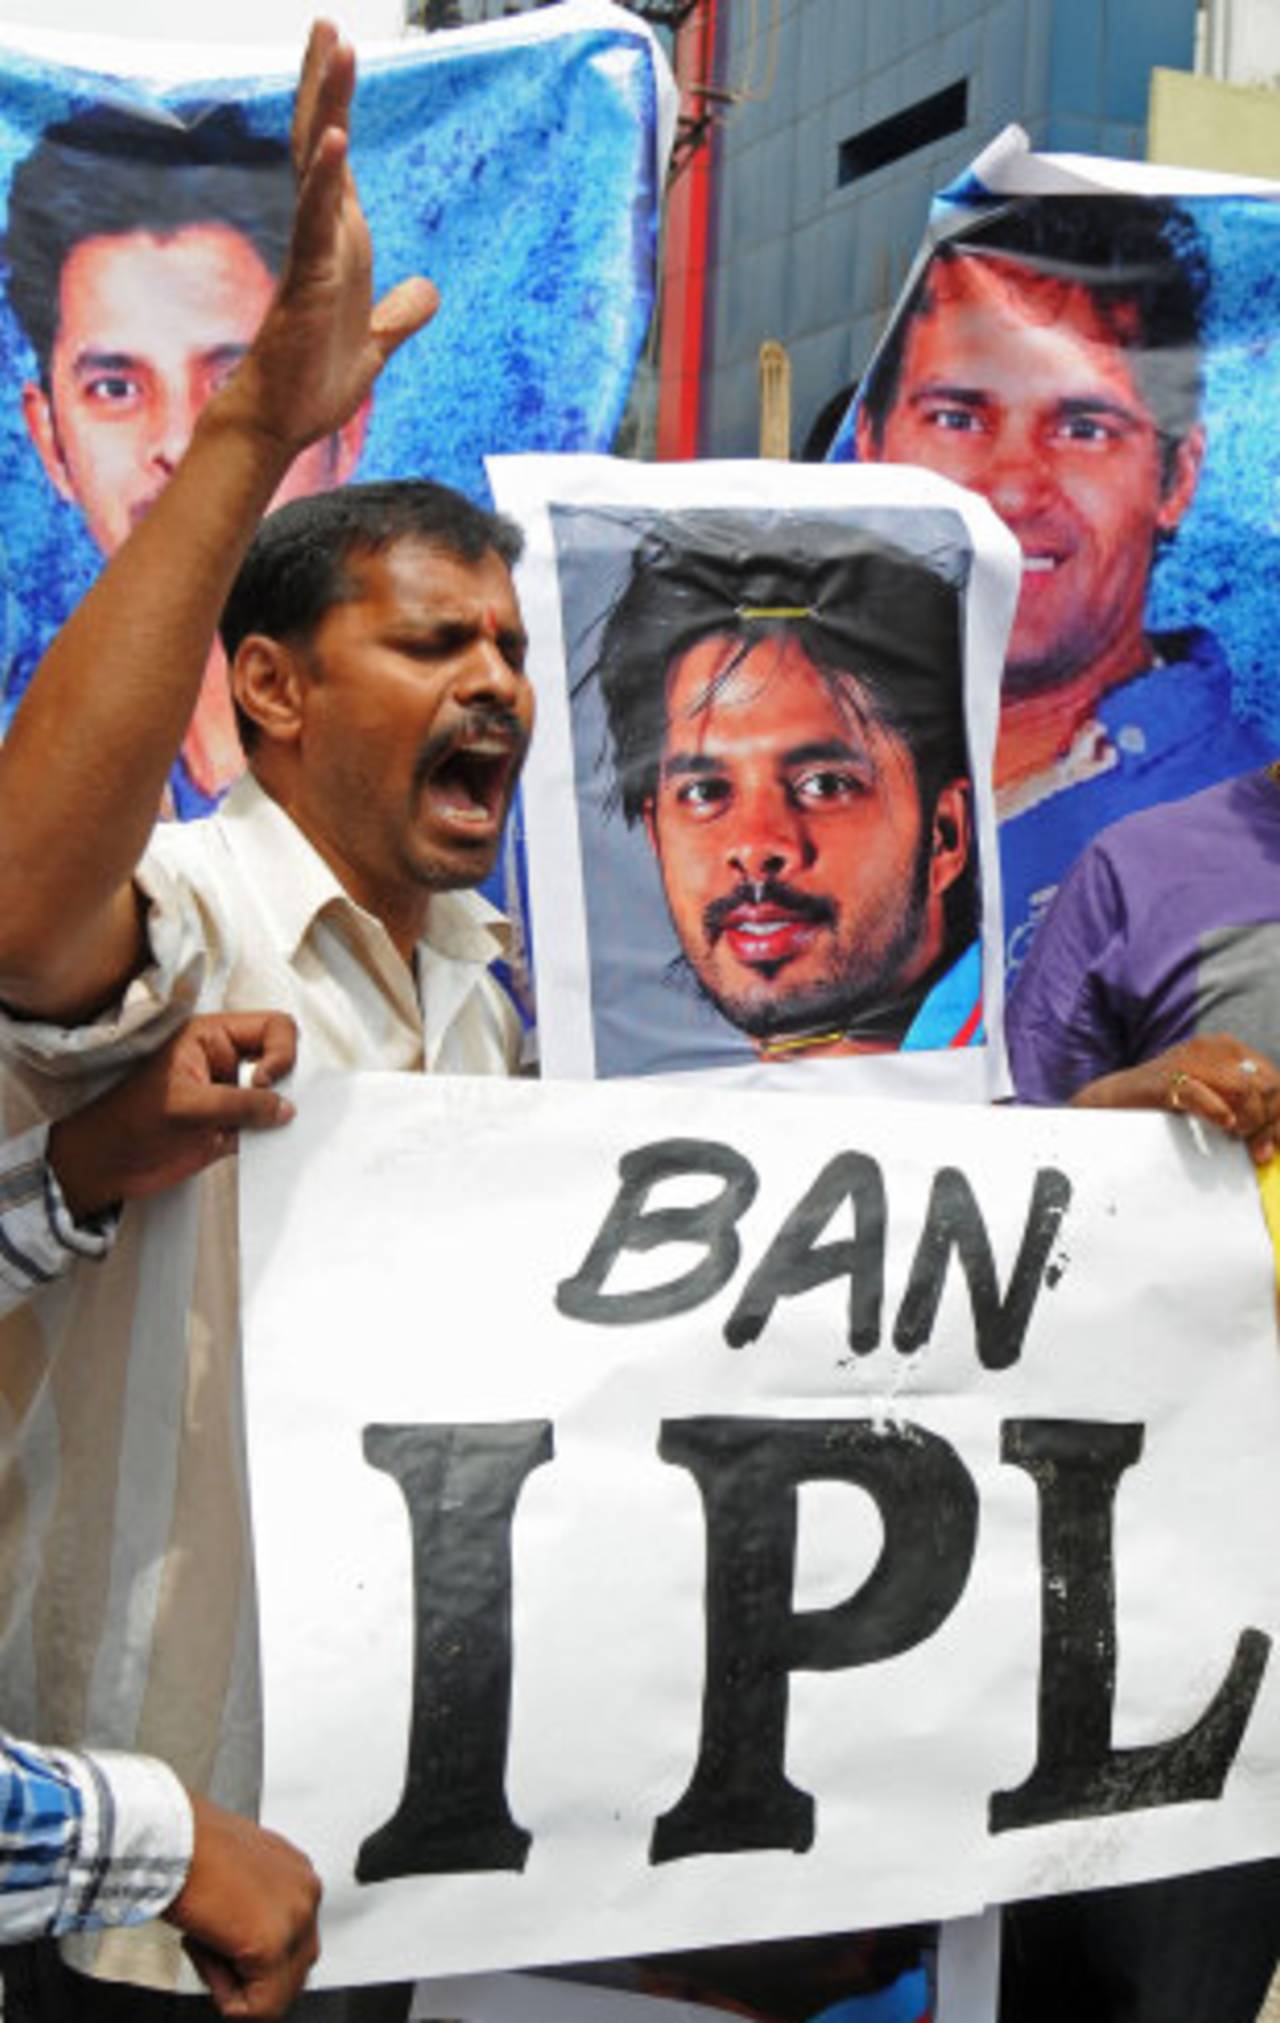 Cricket fans in Bangalore stage a protest after news of the spot-fixing scandal broke, IPL 2013, Bangalore, May 16, 2013